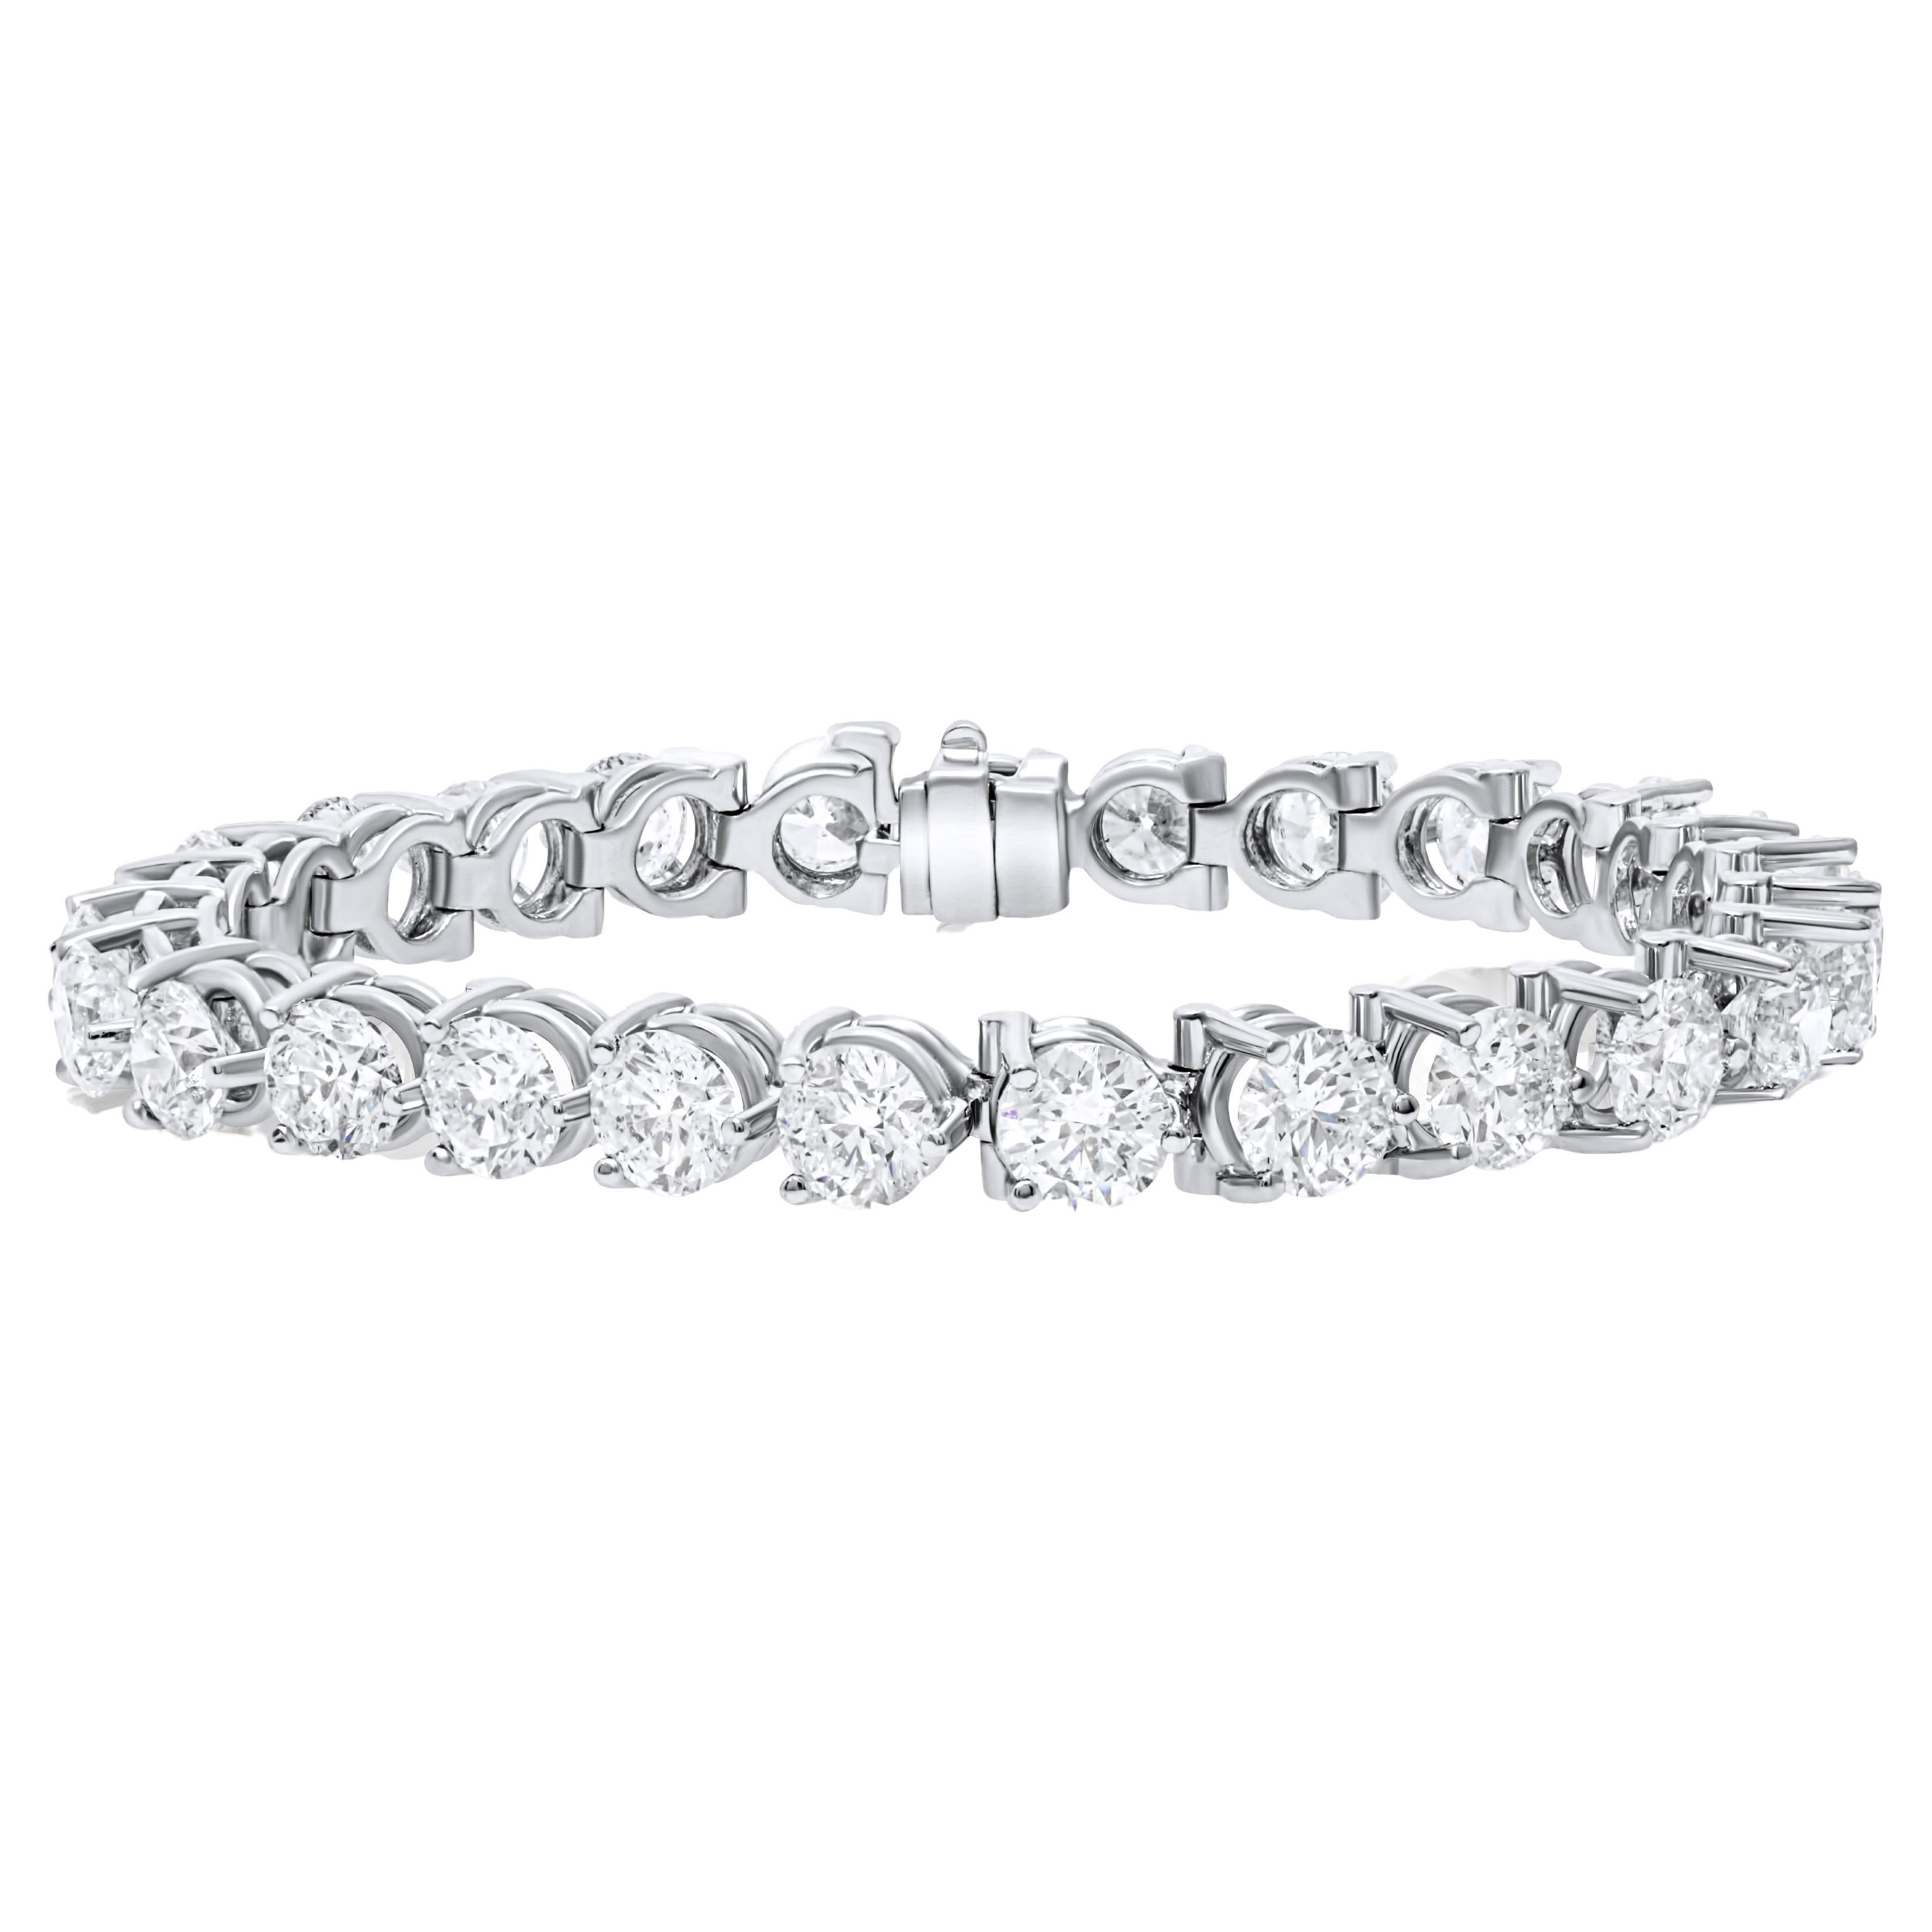 Diana M. 18 kt white gold 3 prong diamond tennis bracelet adorned with 13.00 cts